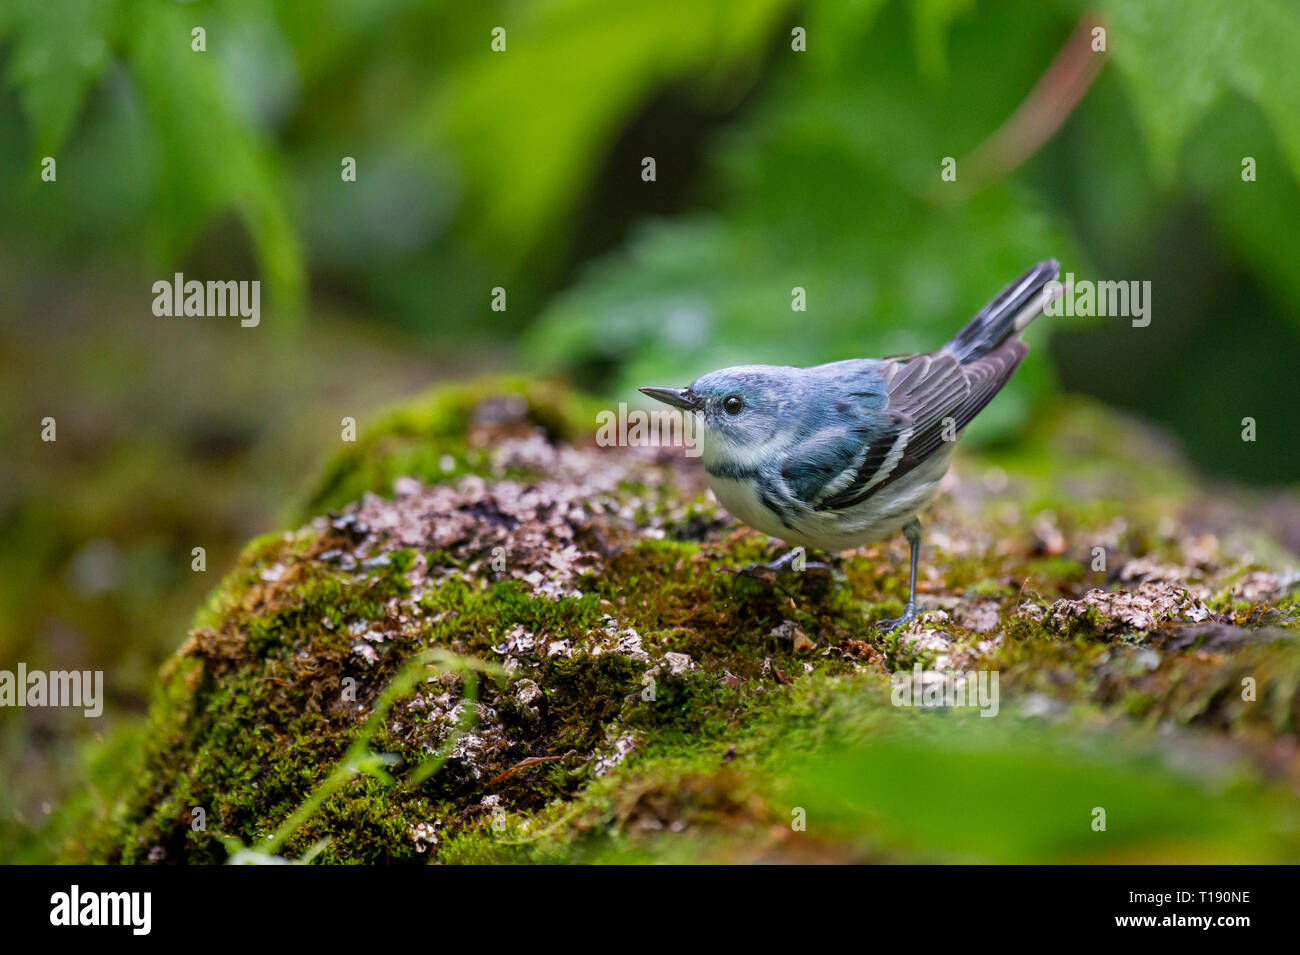 A bright blue Cerulean Warbler perched on a mossy covered log in the bright green forest. Stock Photo